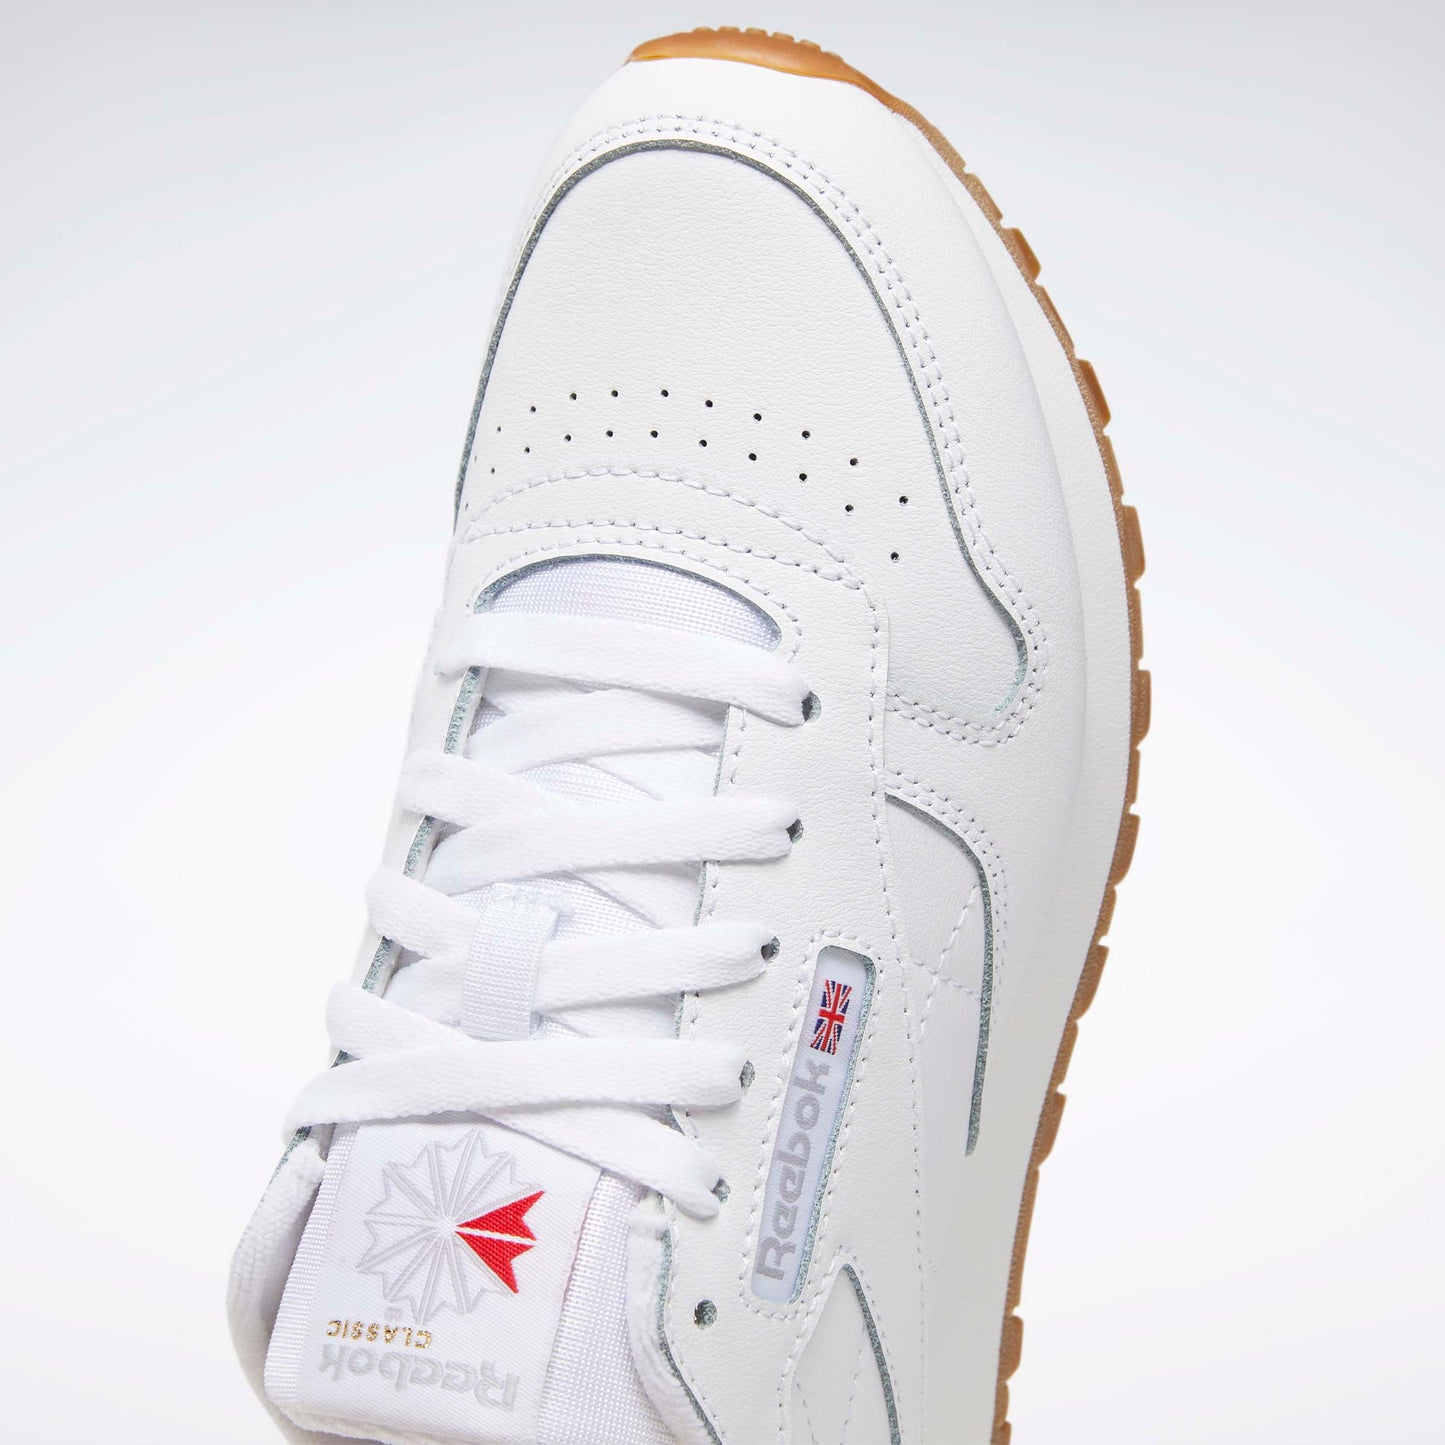 Classic Leather Shoes - Big Kids White/White